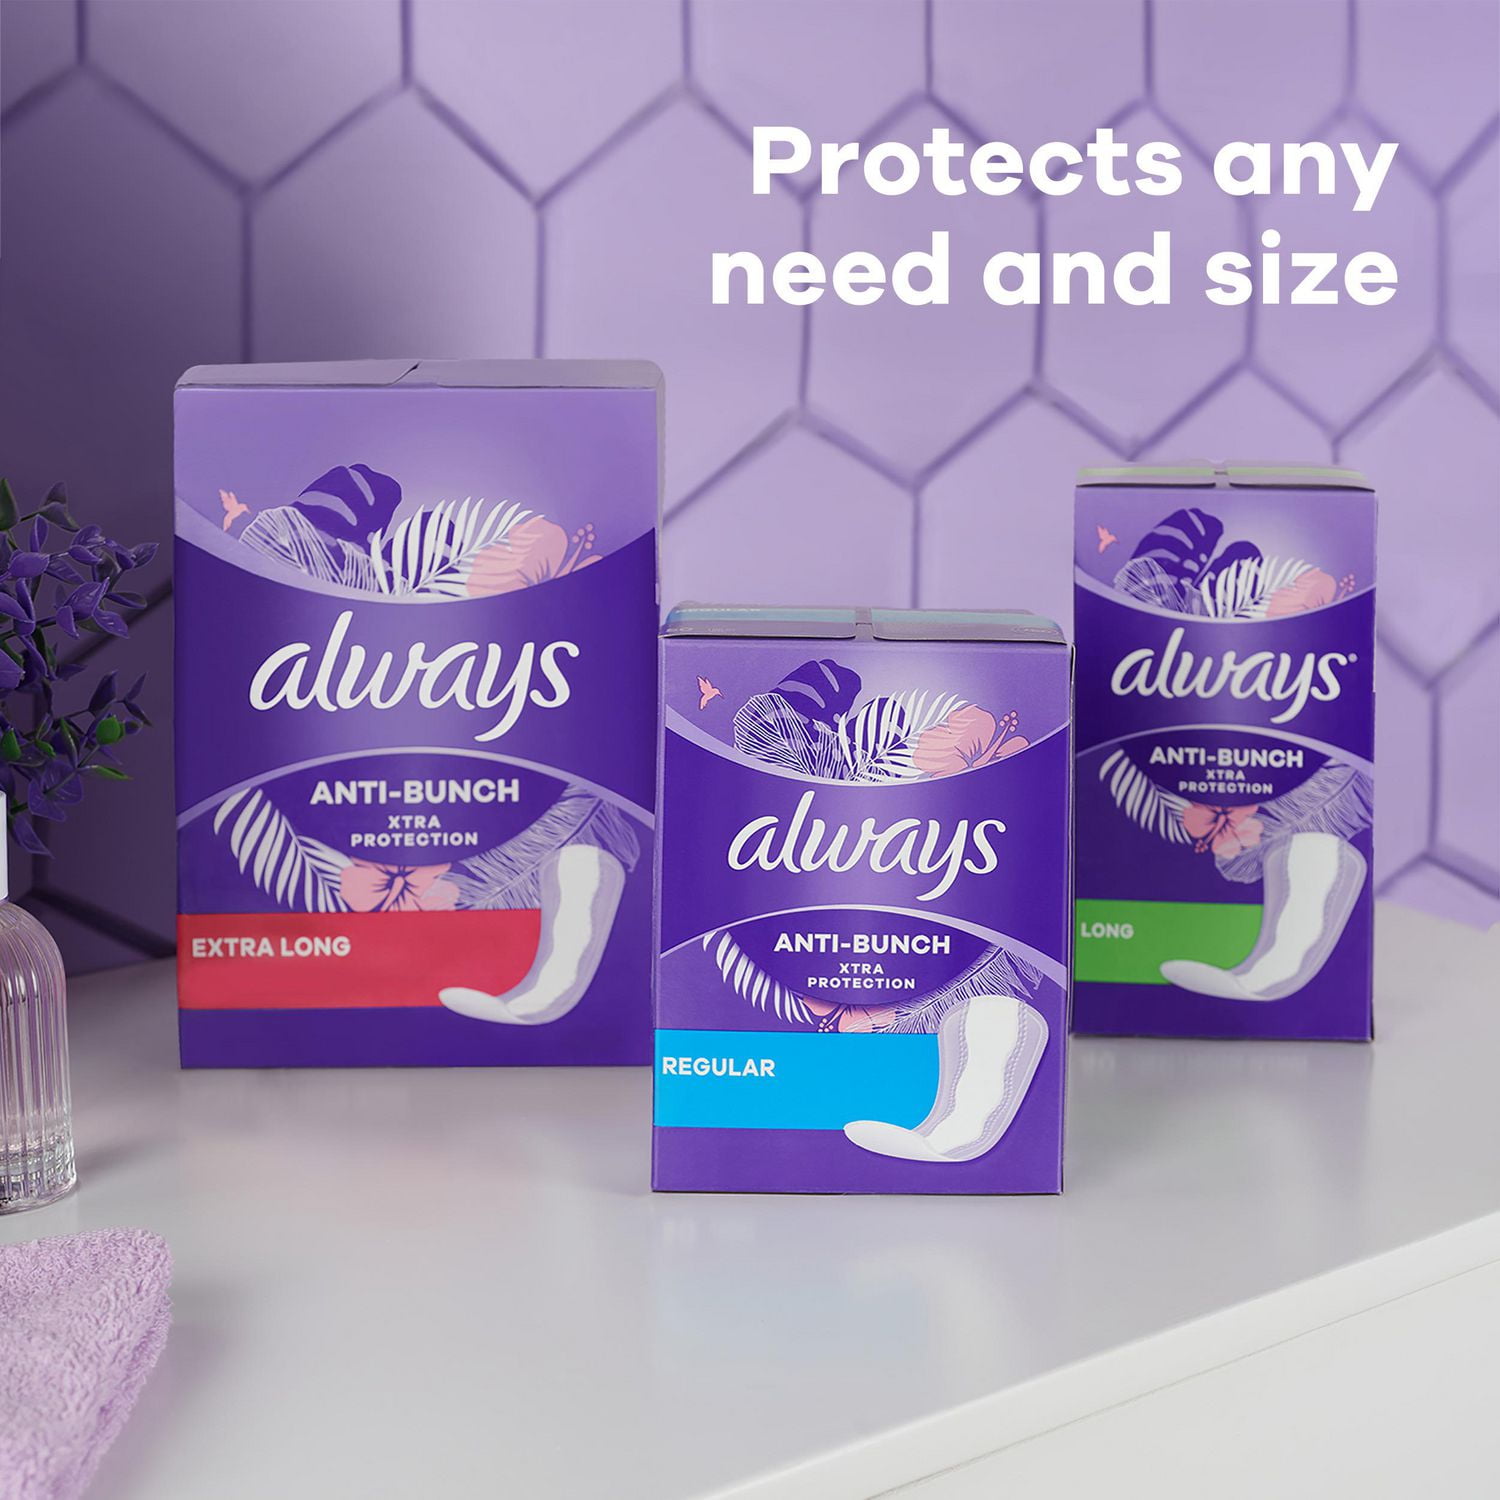 Always Anti-Bunch Xtra Protection Daily Liners Long Unscented, 108 Liners 